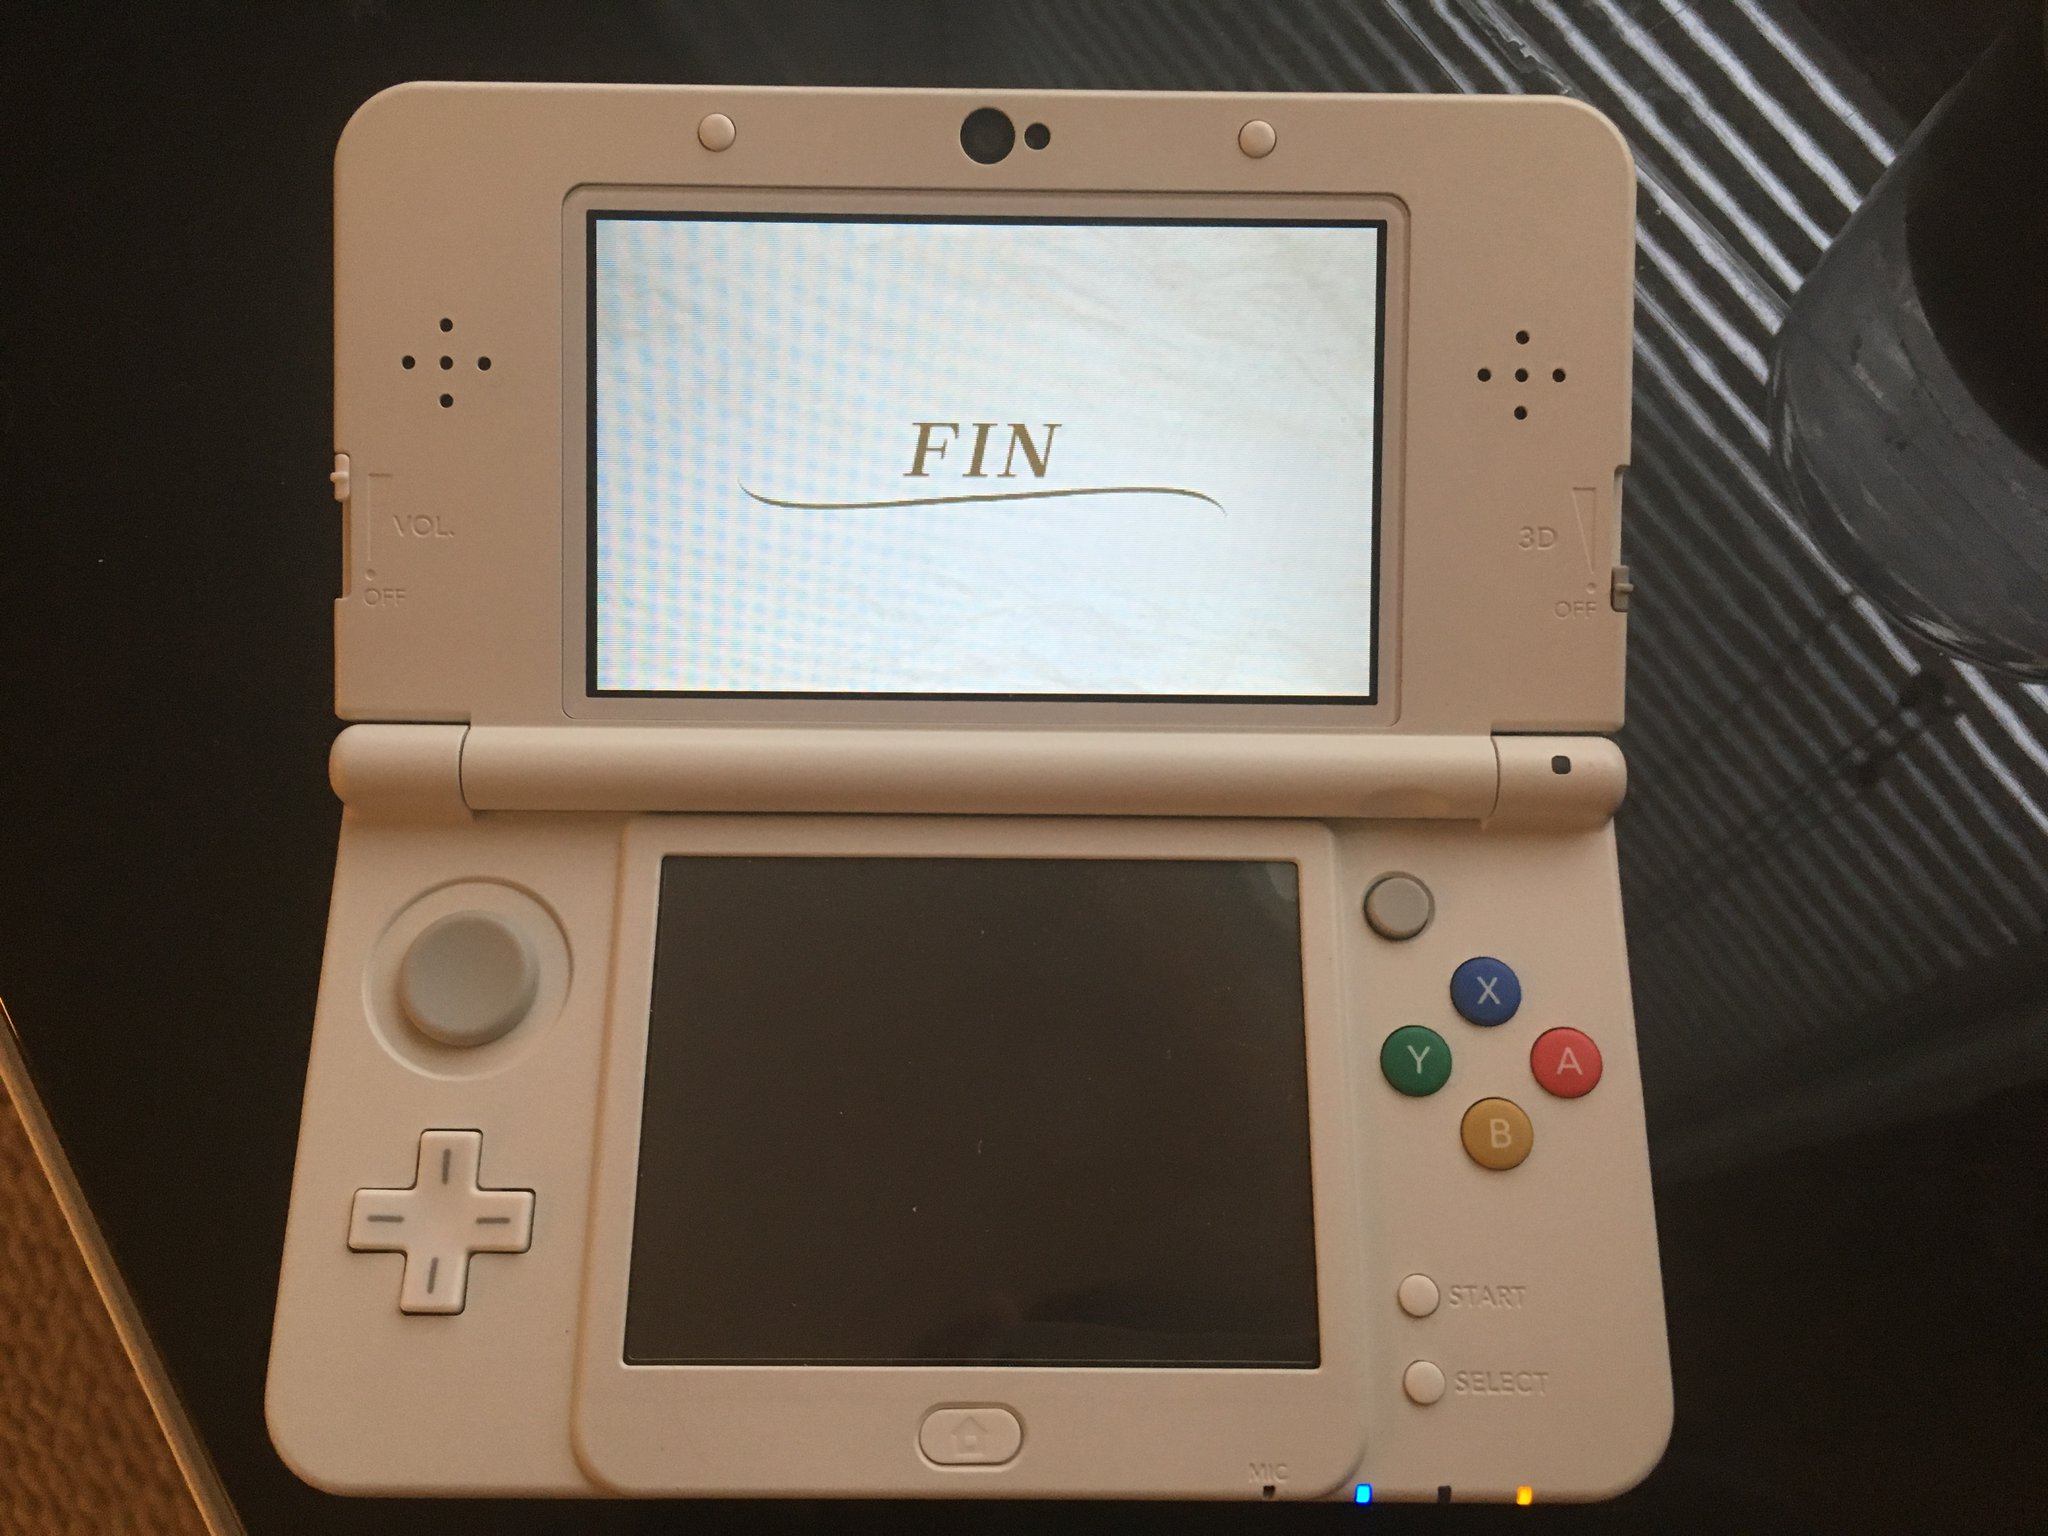 A photo of a 3DS. Bottom screen off, top screen full white with black text: "Fin"